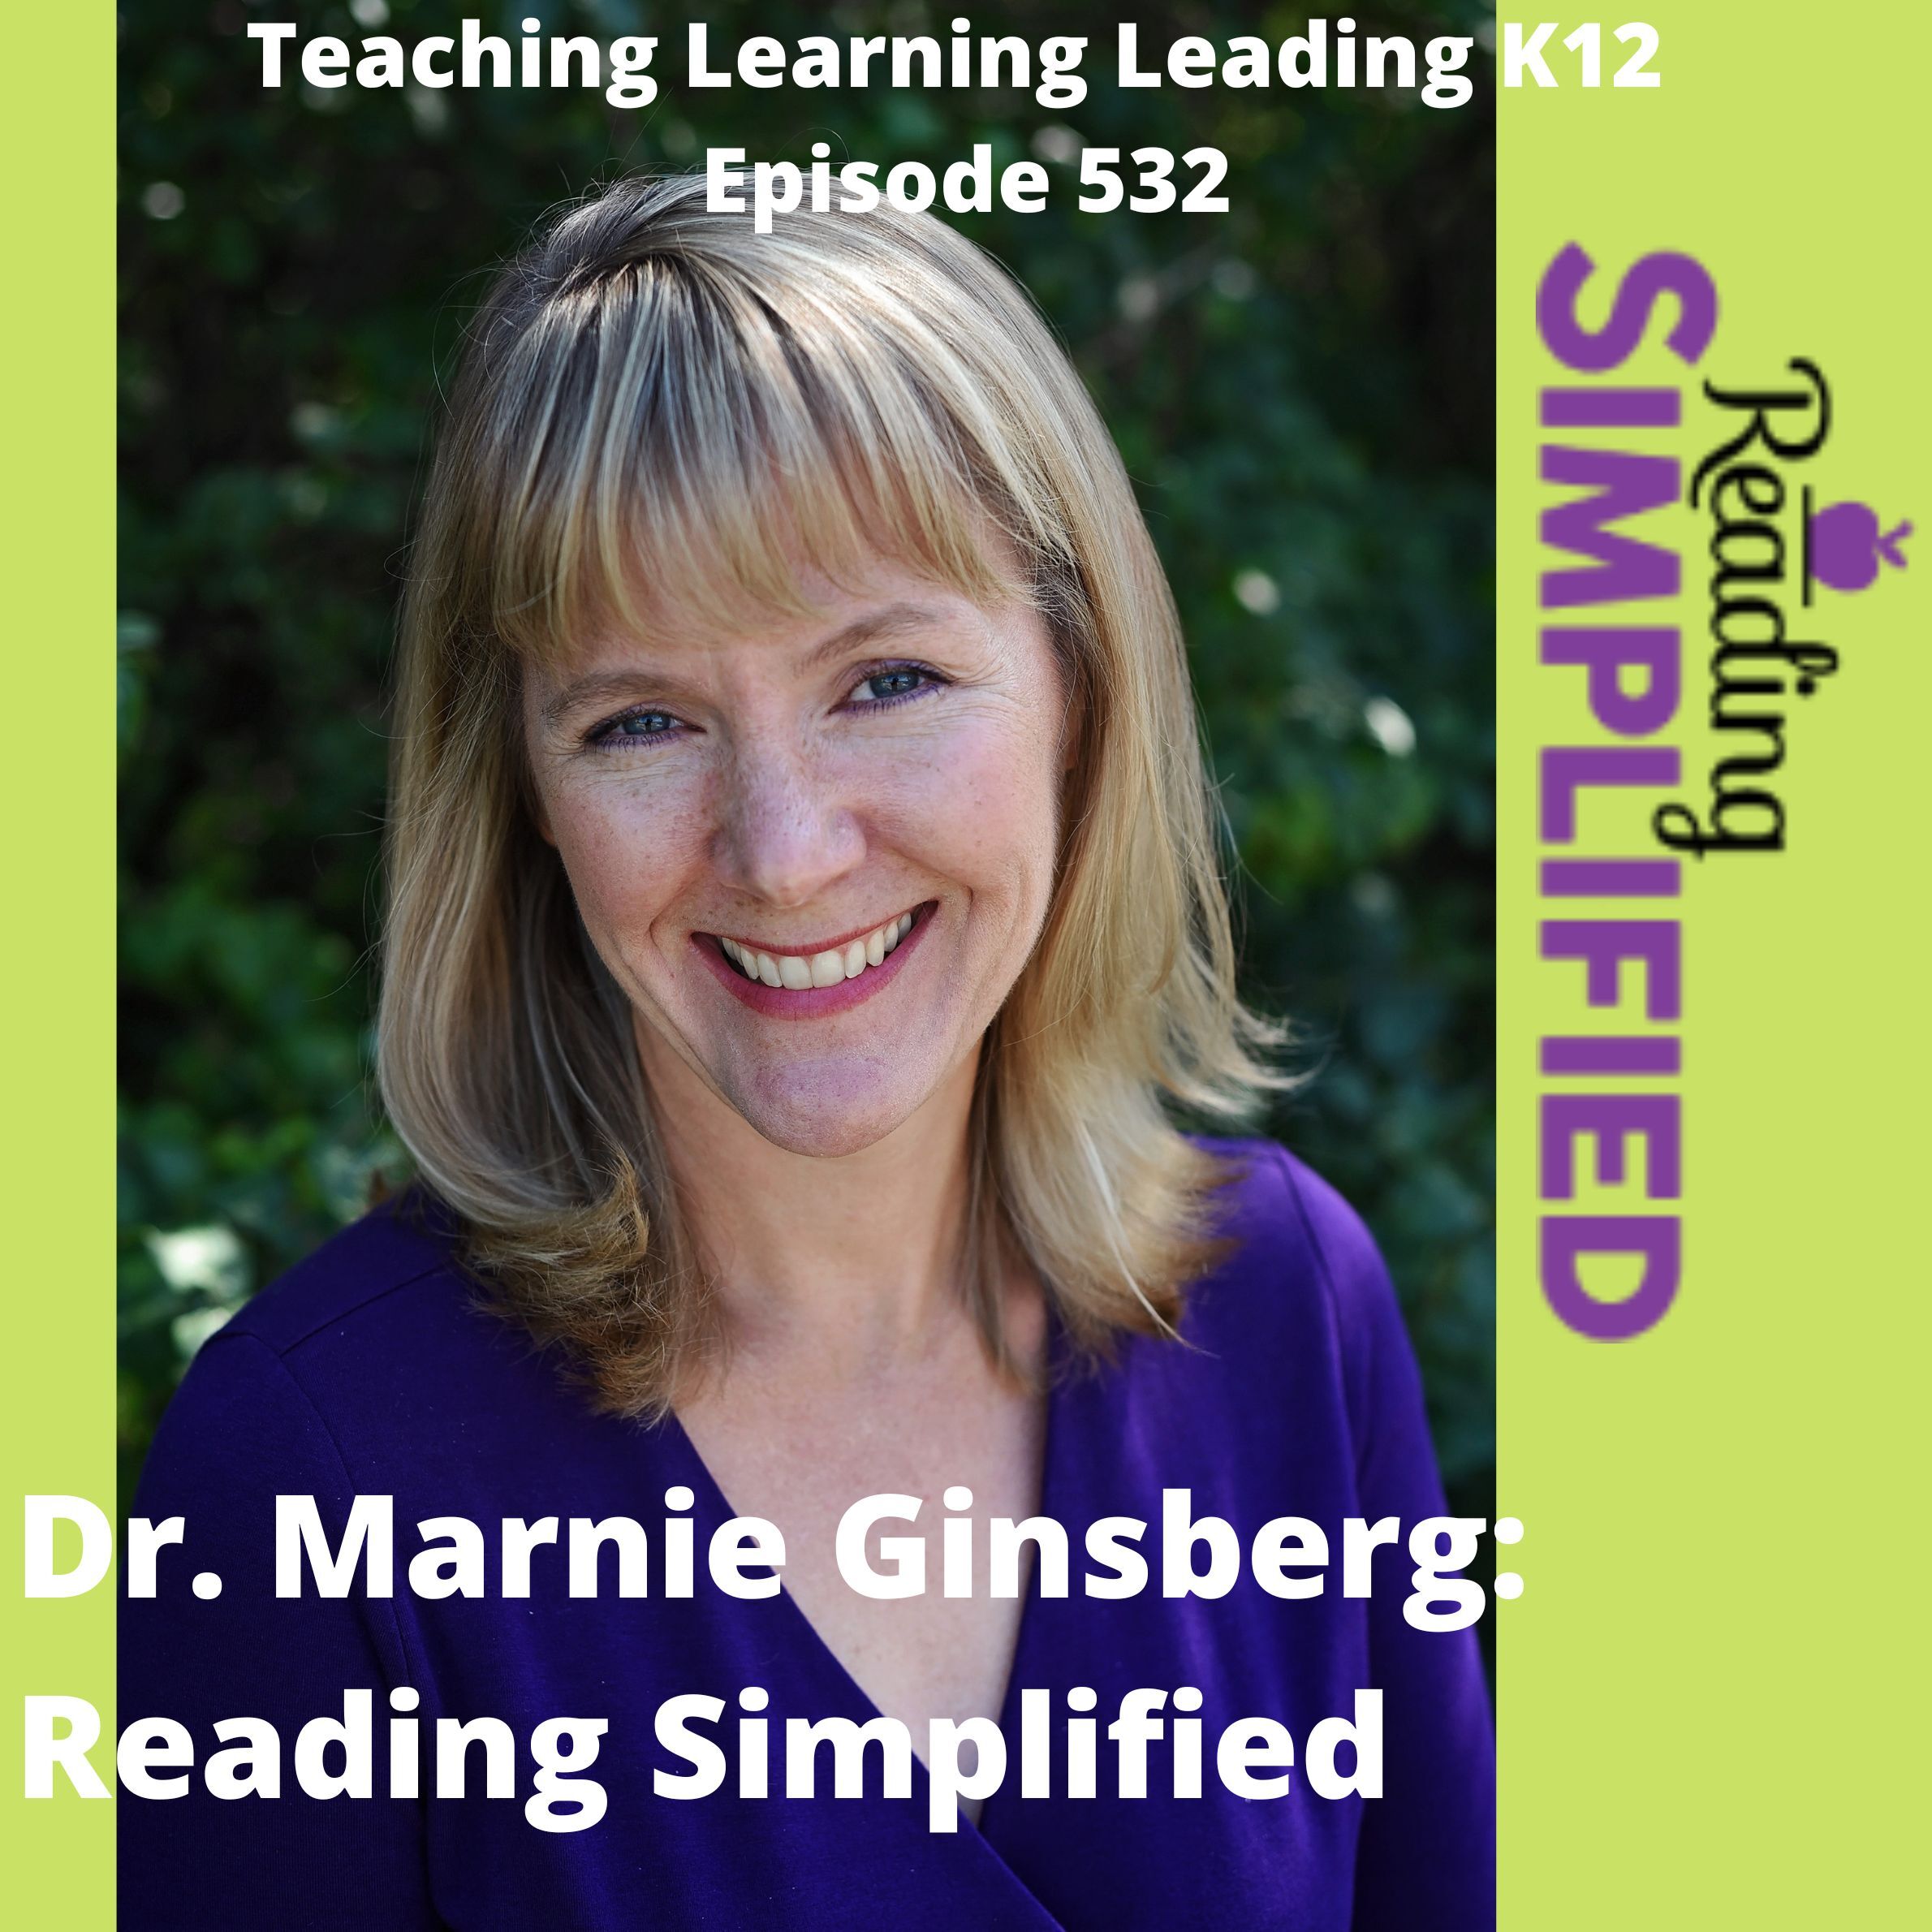 Dr. Marnie Ginsberg: Reading Simplified - 532 Image